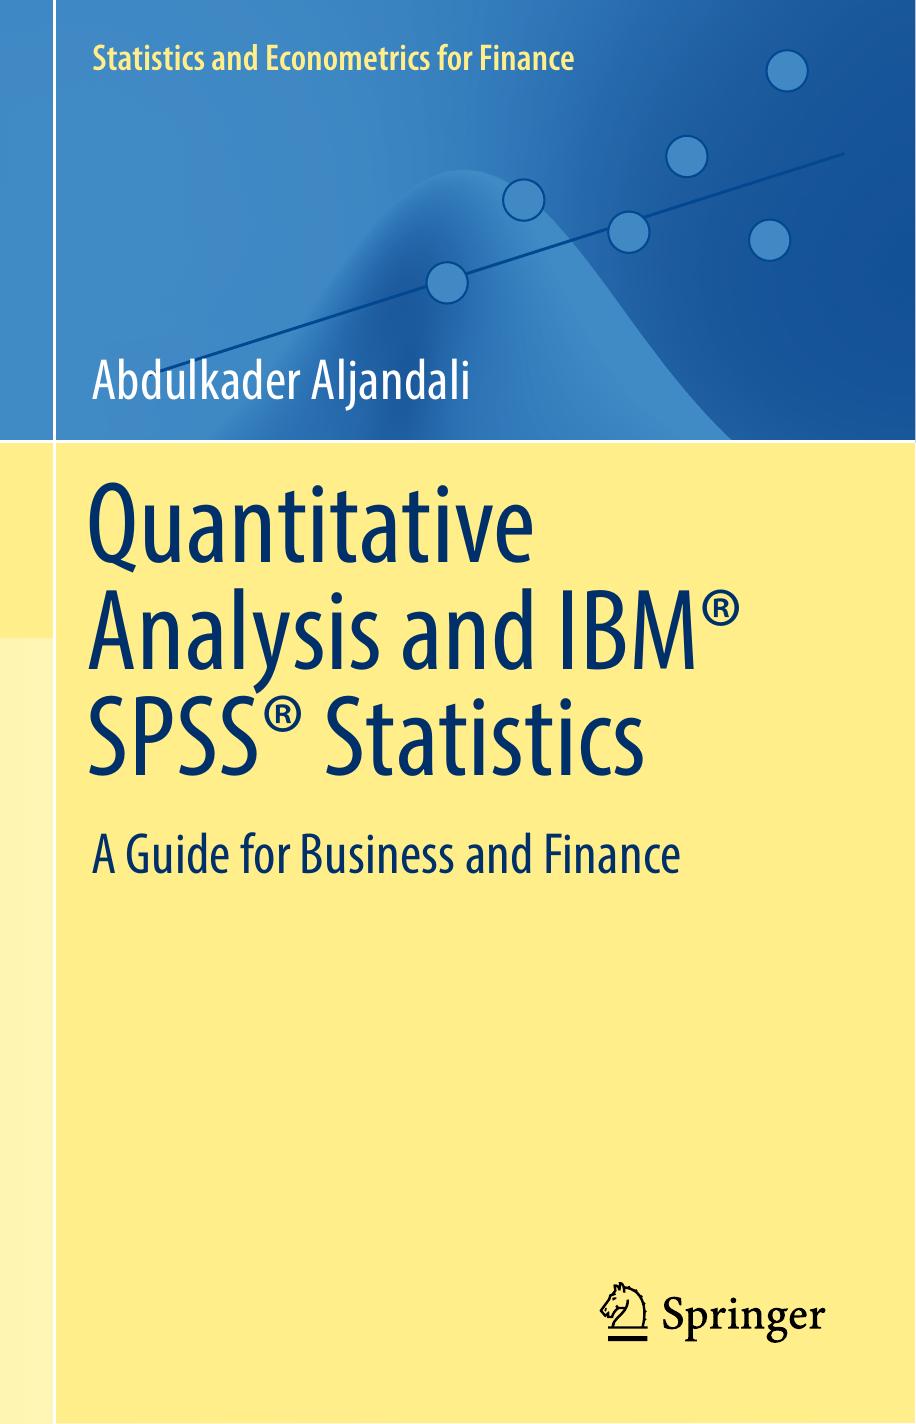 Quantitative Analysis and IBM® SPSS® Statistics A Guide for Business and Finance 2016